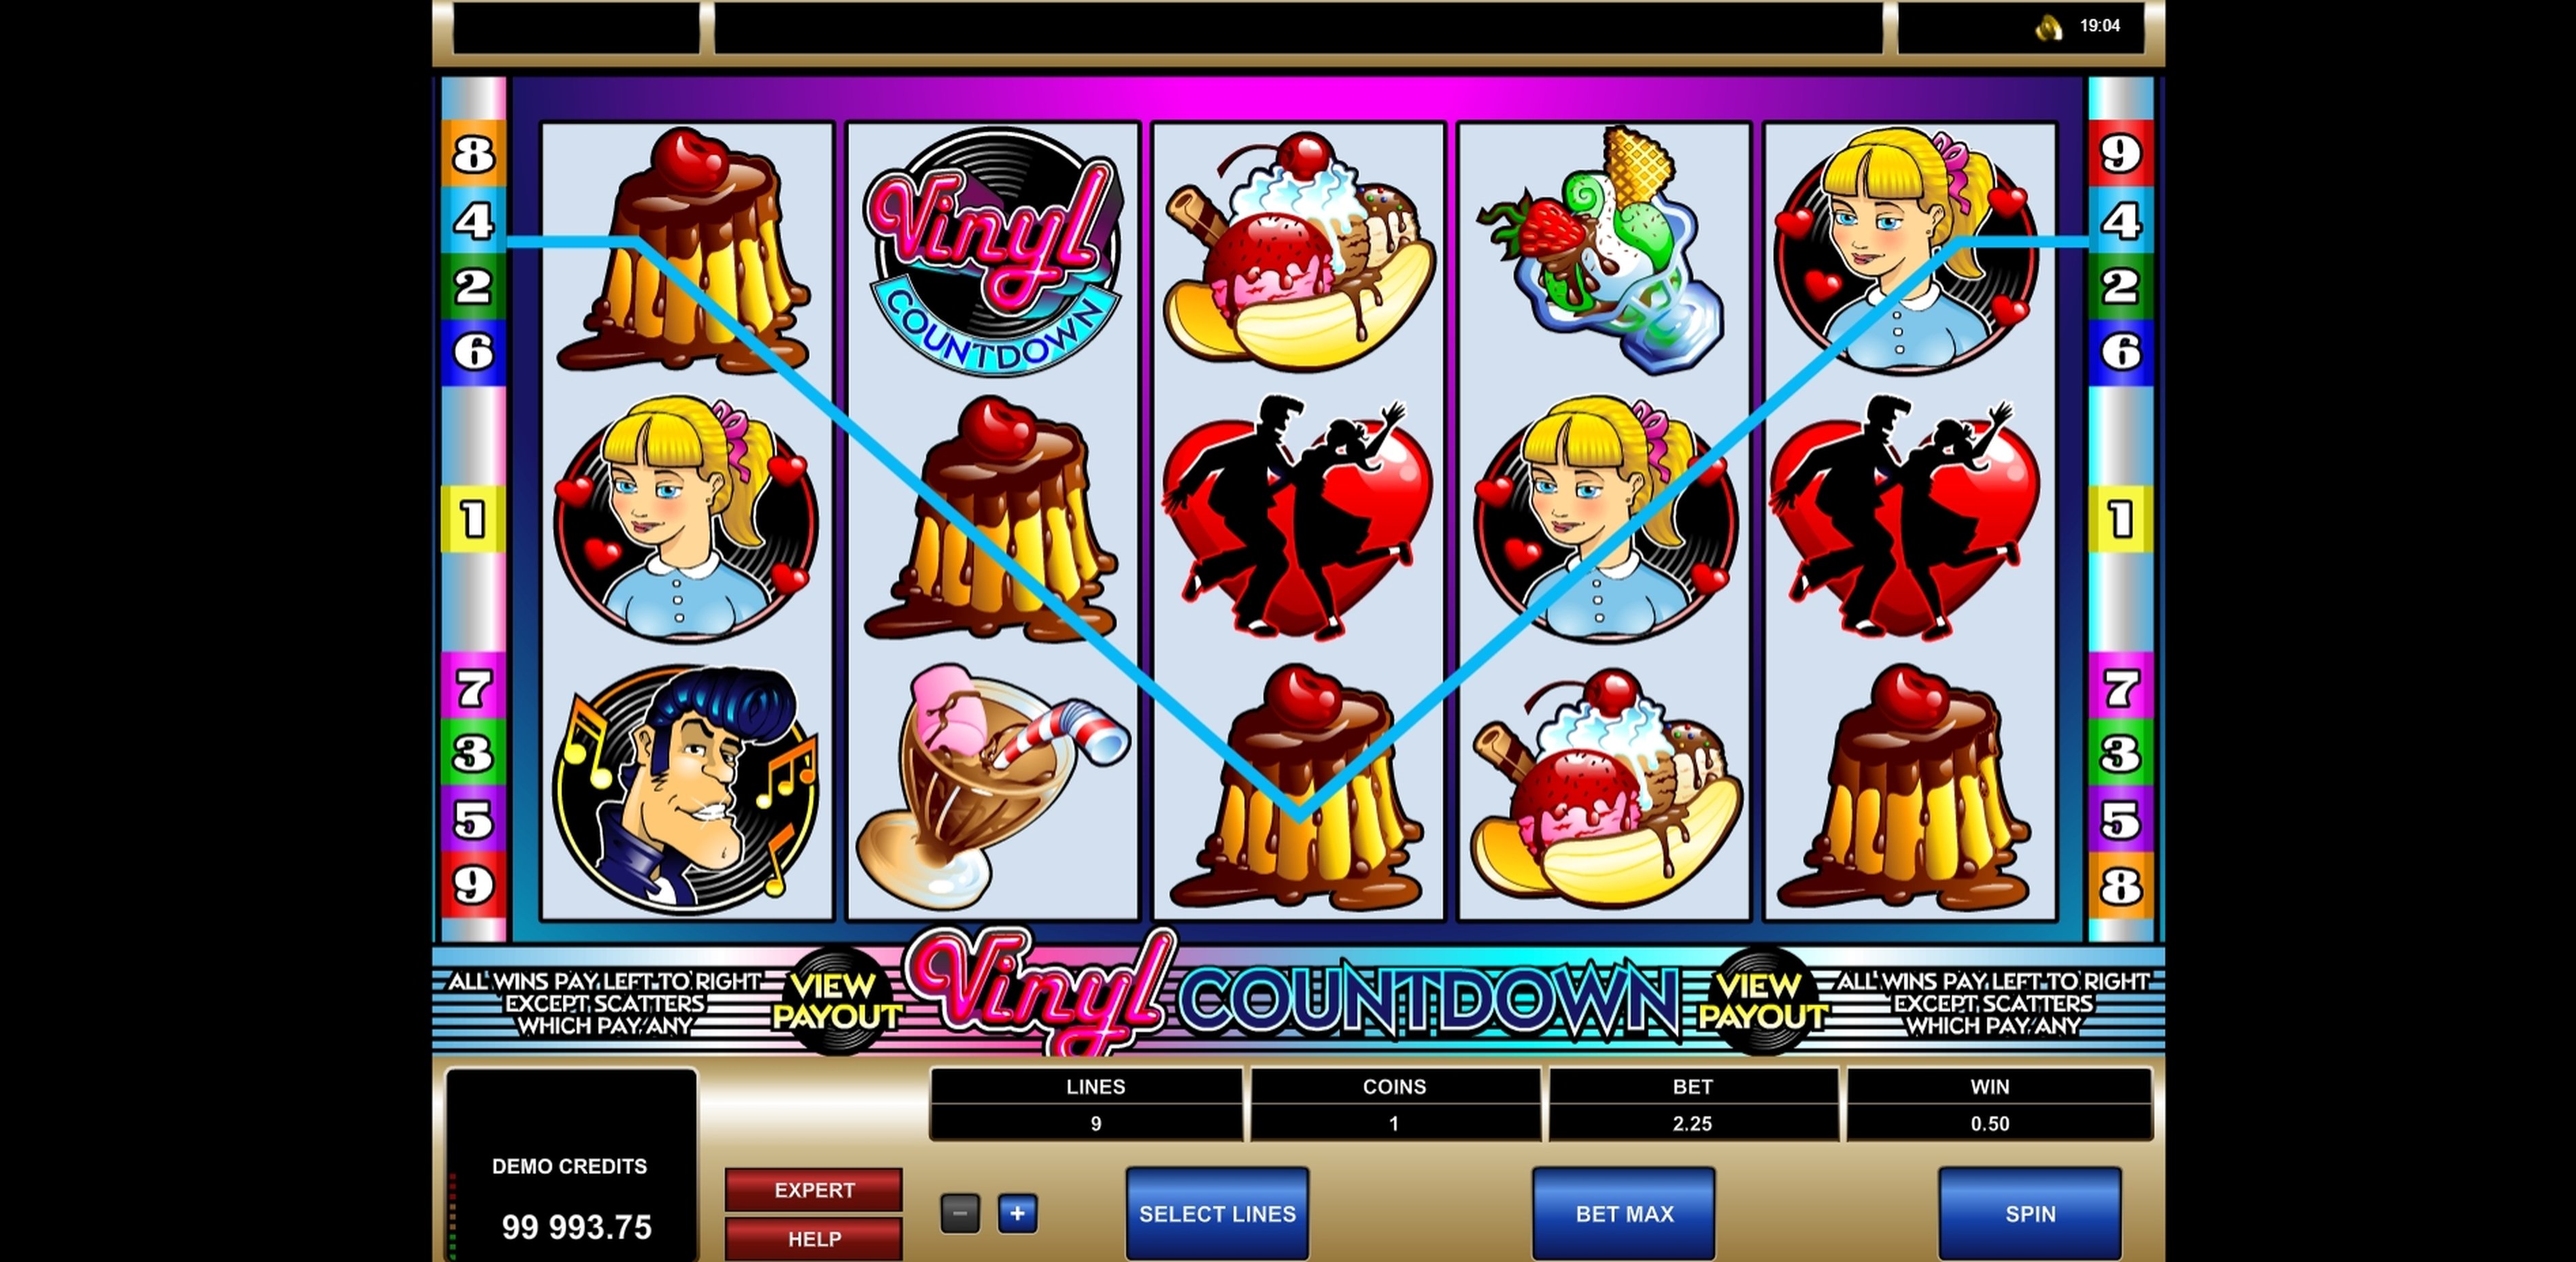 Win Money in Vinyl Countdown Free Slot Game by Microgaming